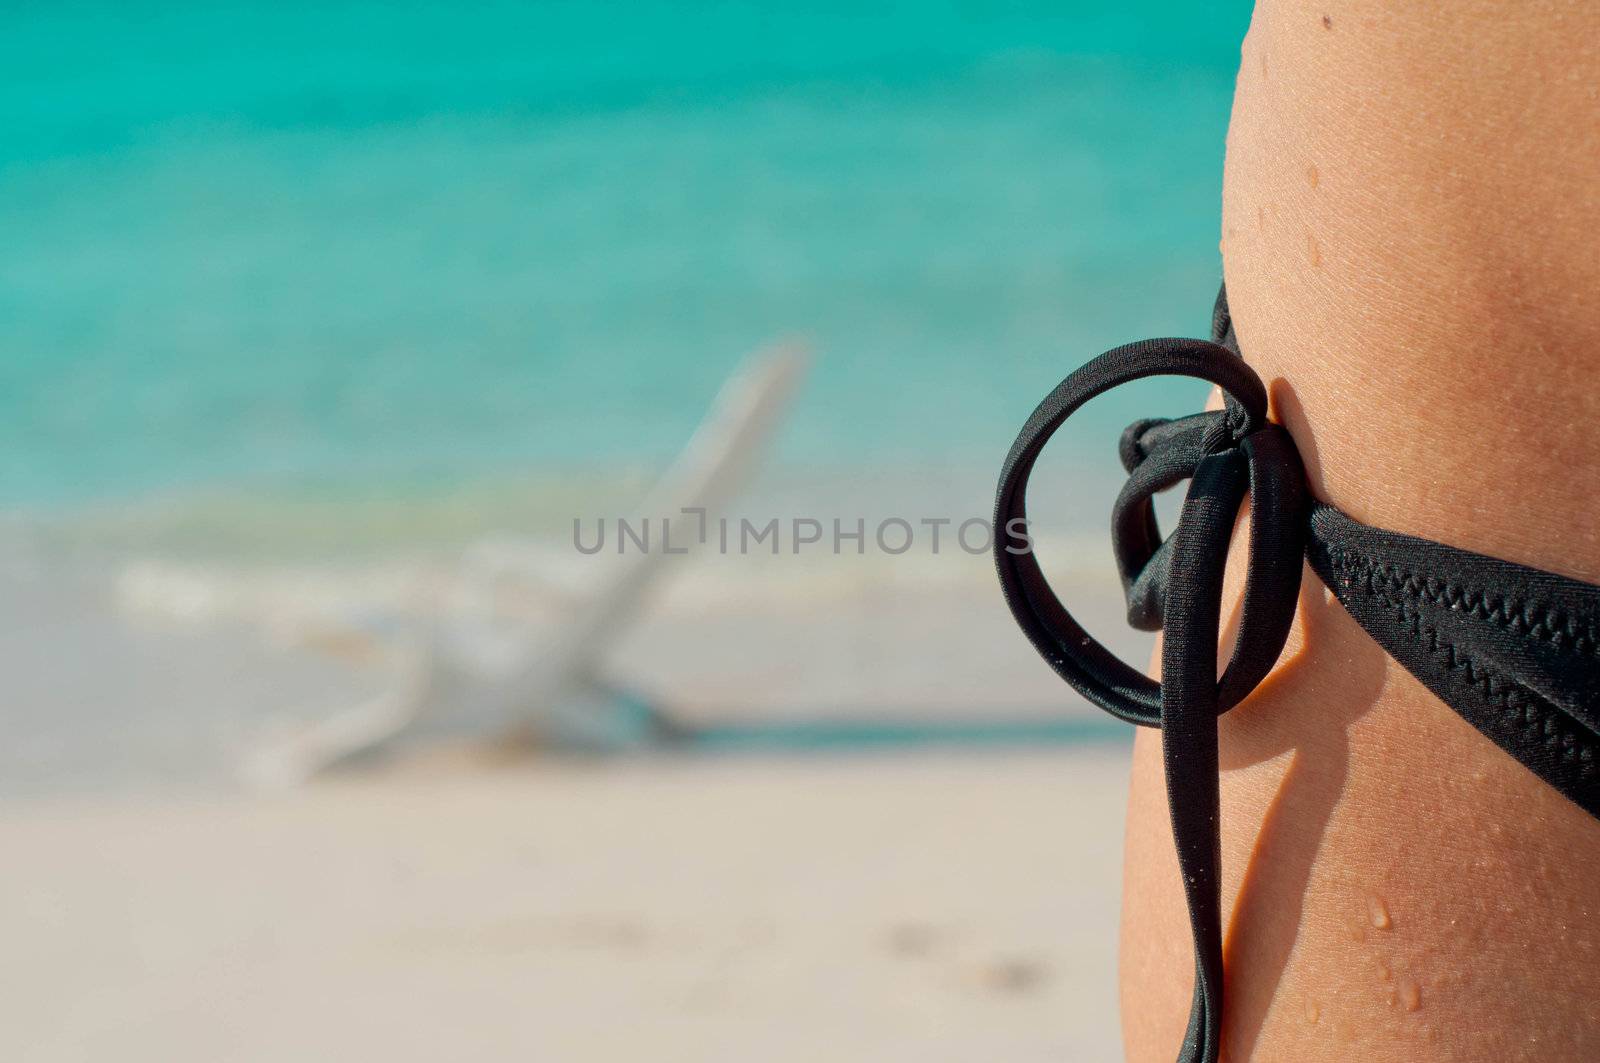 Image of a woman's hip with a bikini against a beach background.